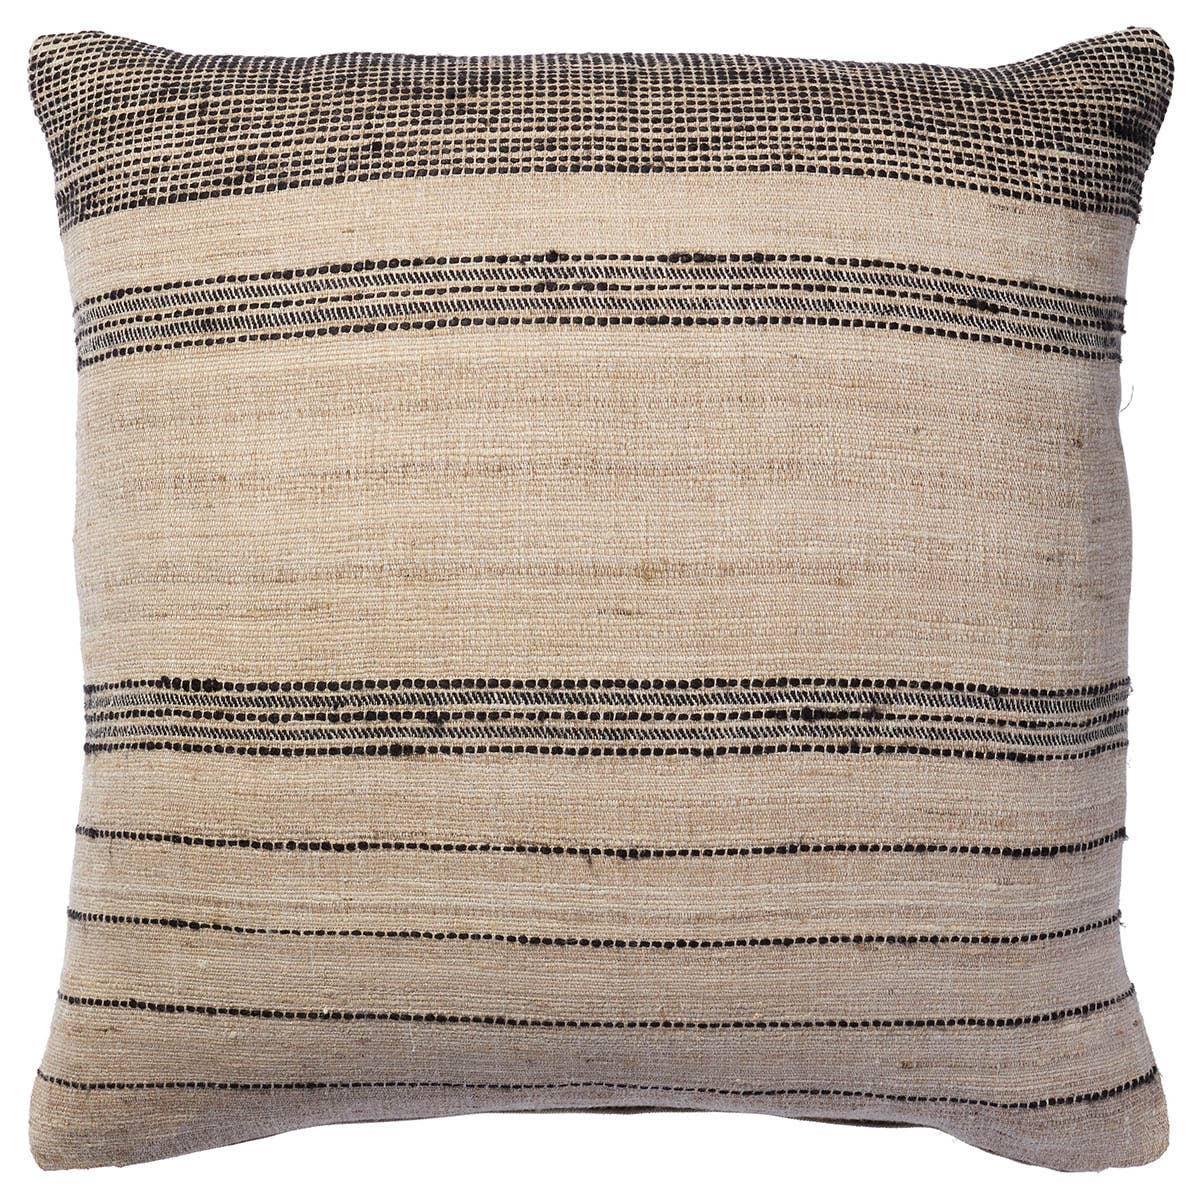 The handcrafted Assise pillow design draws its inspiration from classic linens. This casual stripe brings a sense of structure and order but balanced with an easy softness. The charcoal and off-white color palette provides neutrality to any space.Indoor Pillow Amethyst Home provides interior design, new home construction design consulting, vintage area rugs, and lighting in the Scottsdale metro area.